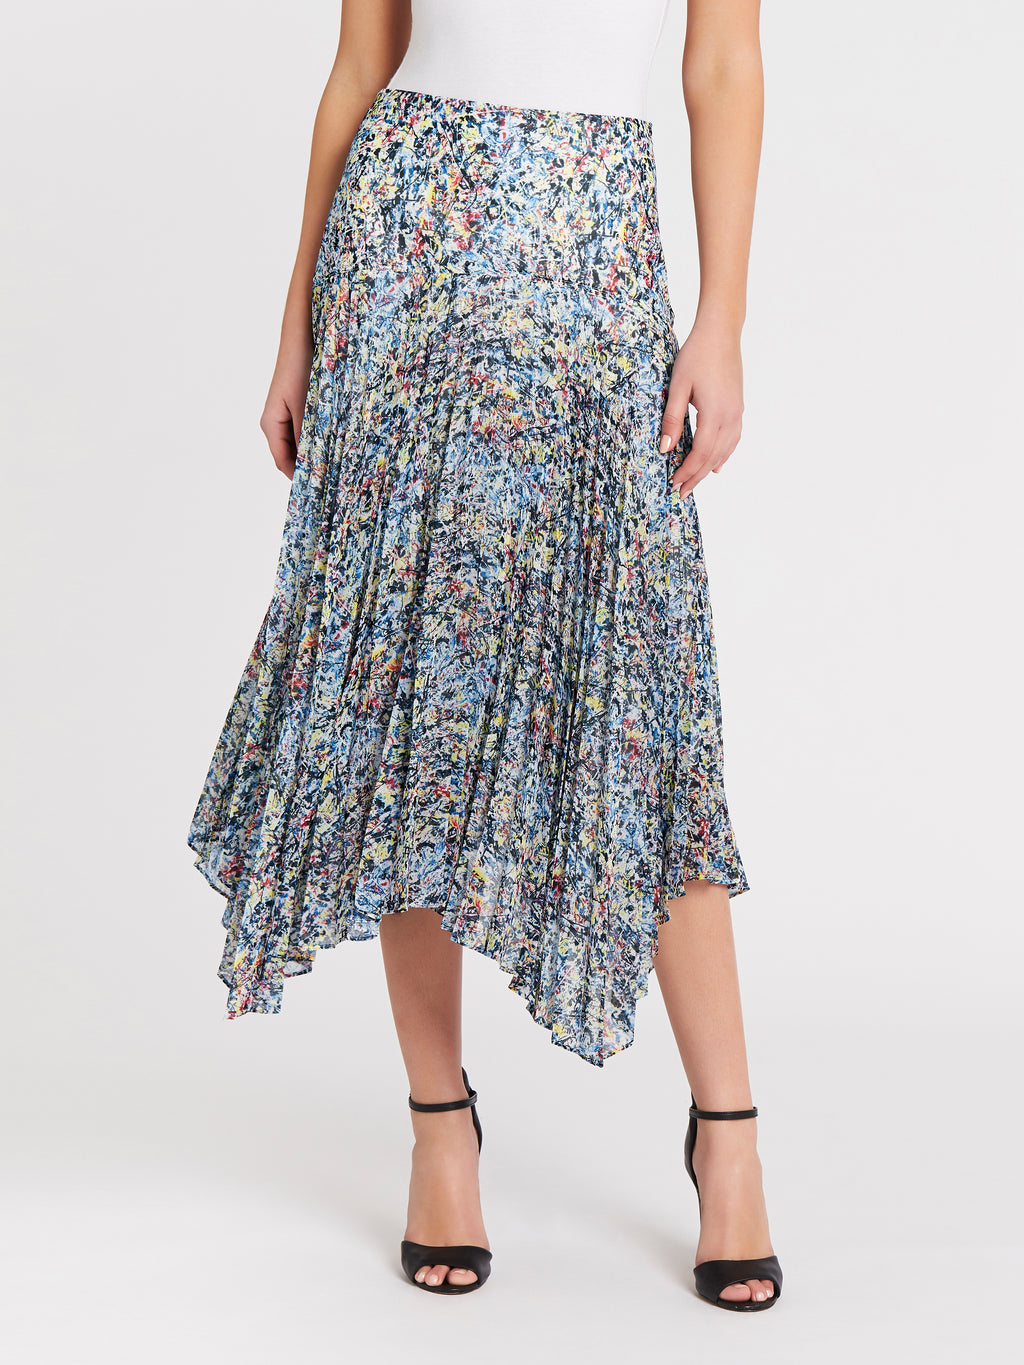 Camilla and Marc Allman Skirt in Fritz Print – Order Of Style